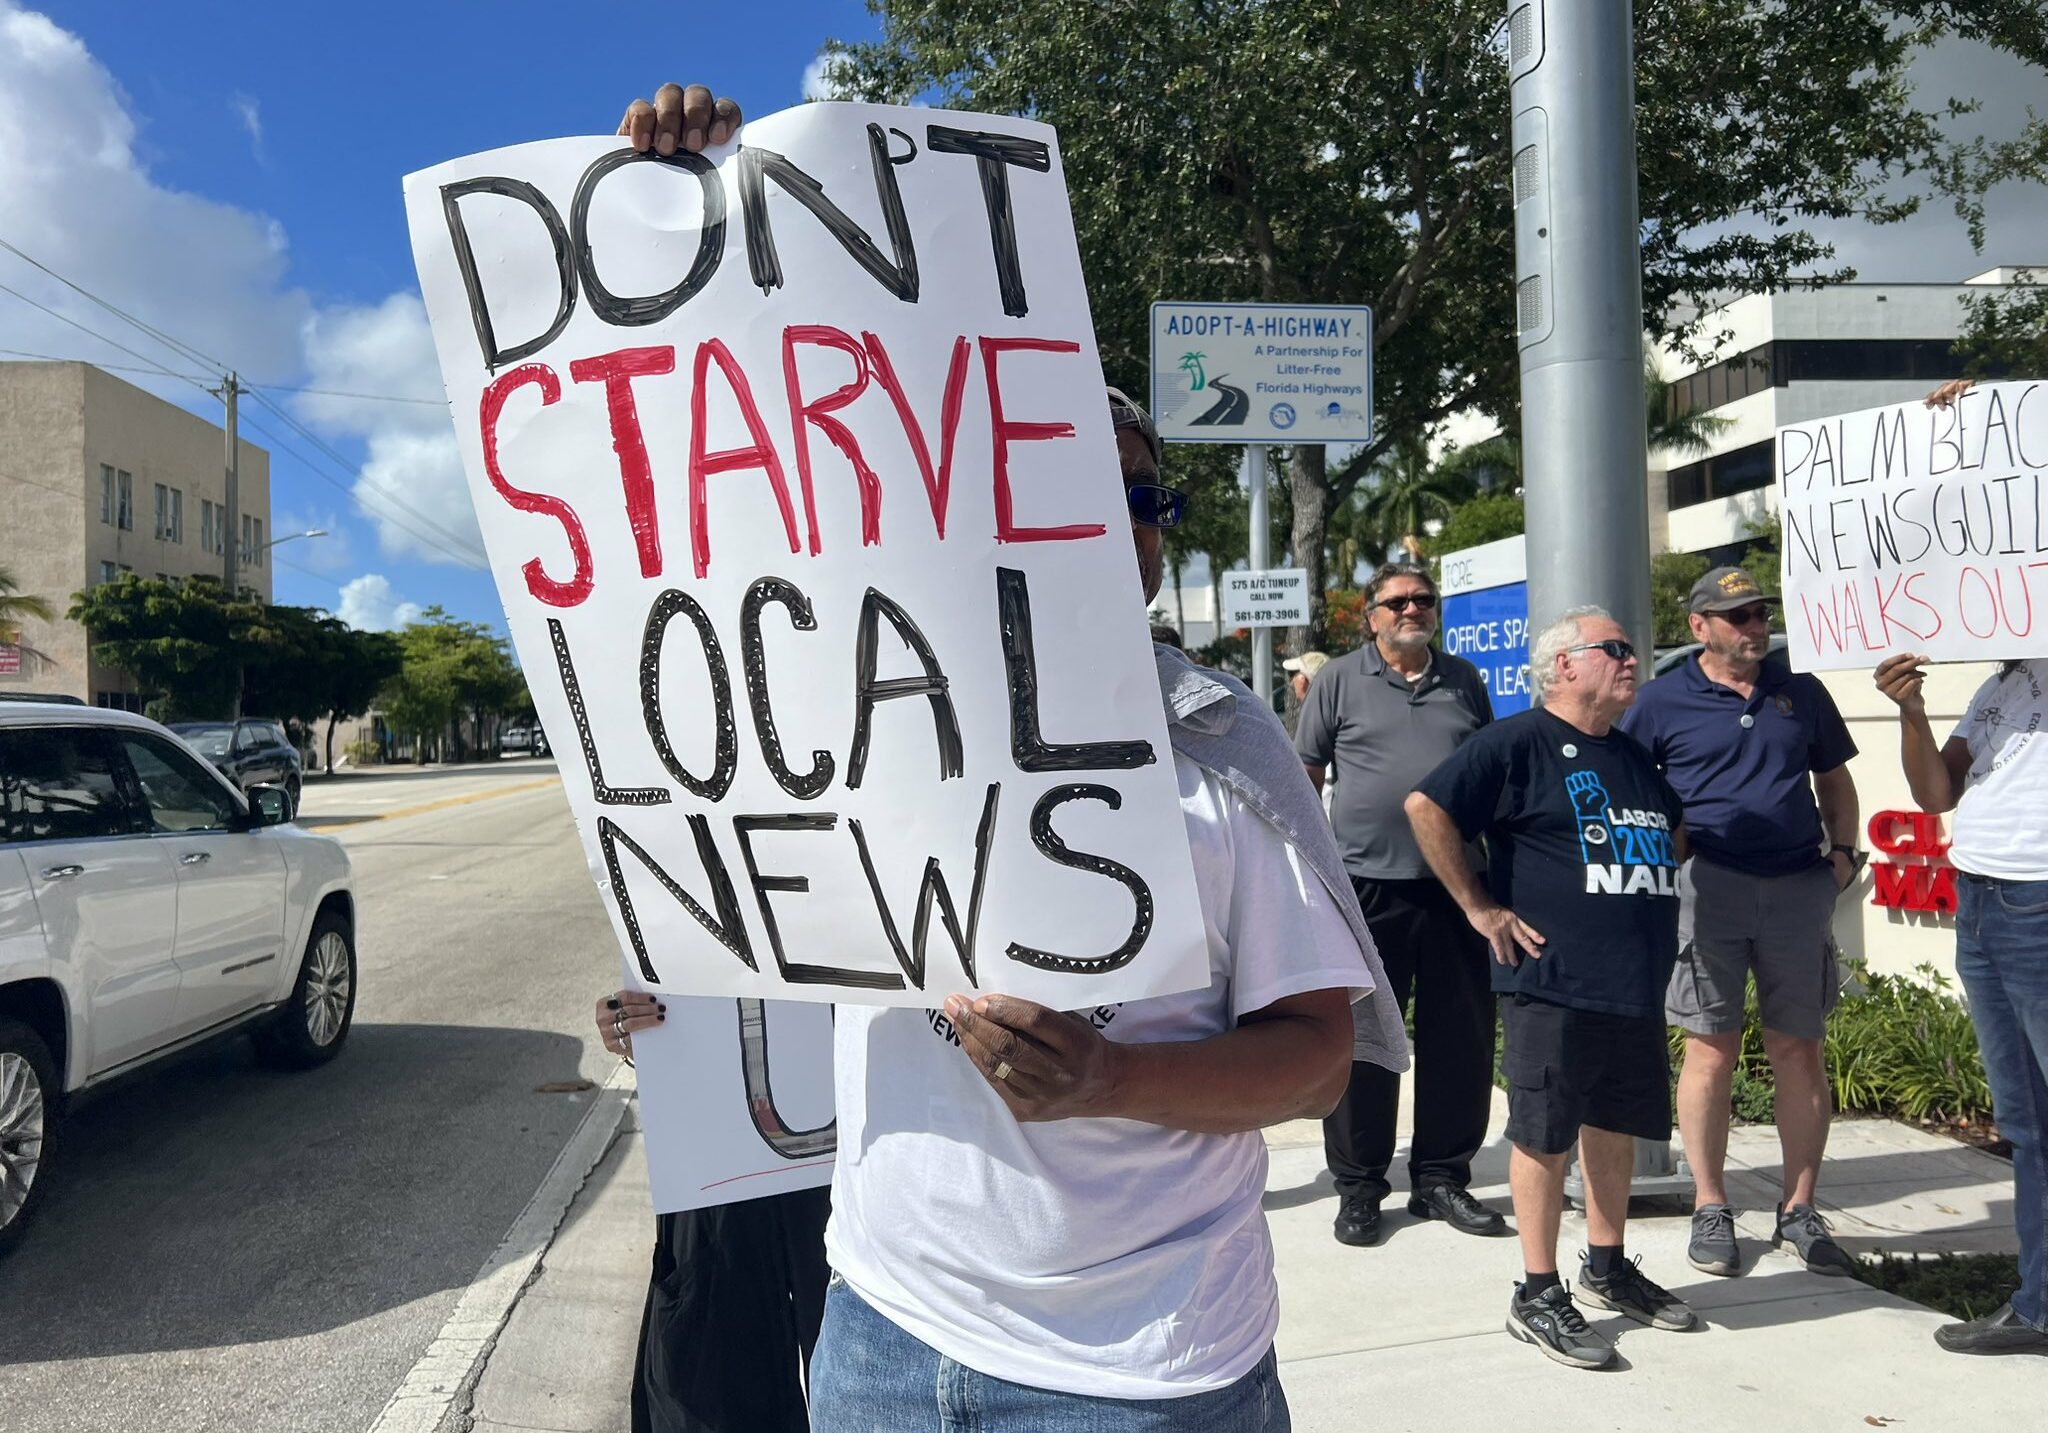 Photo of person holding sign at a rally during a strike at Gannett that reads, "Don't starve local news." Other workers and supporters are in the background with one sign that reads "Palm Beach NewsGuild walks out"